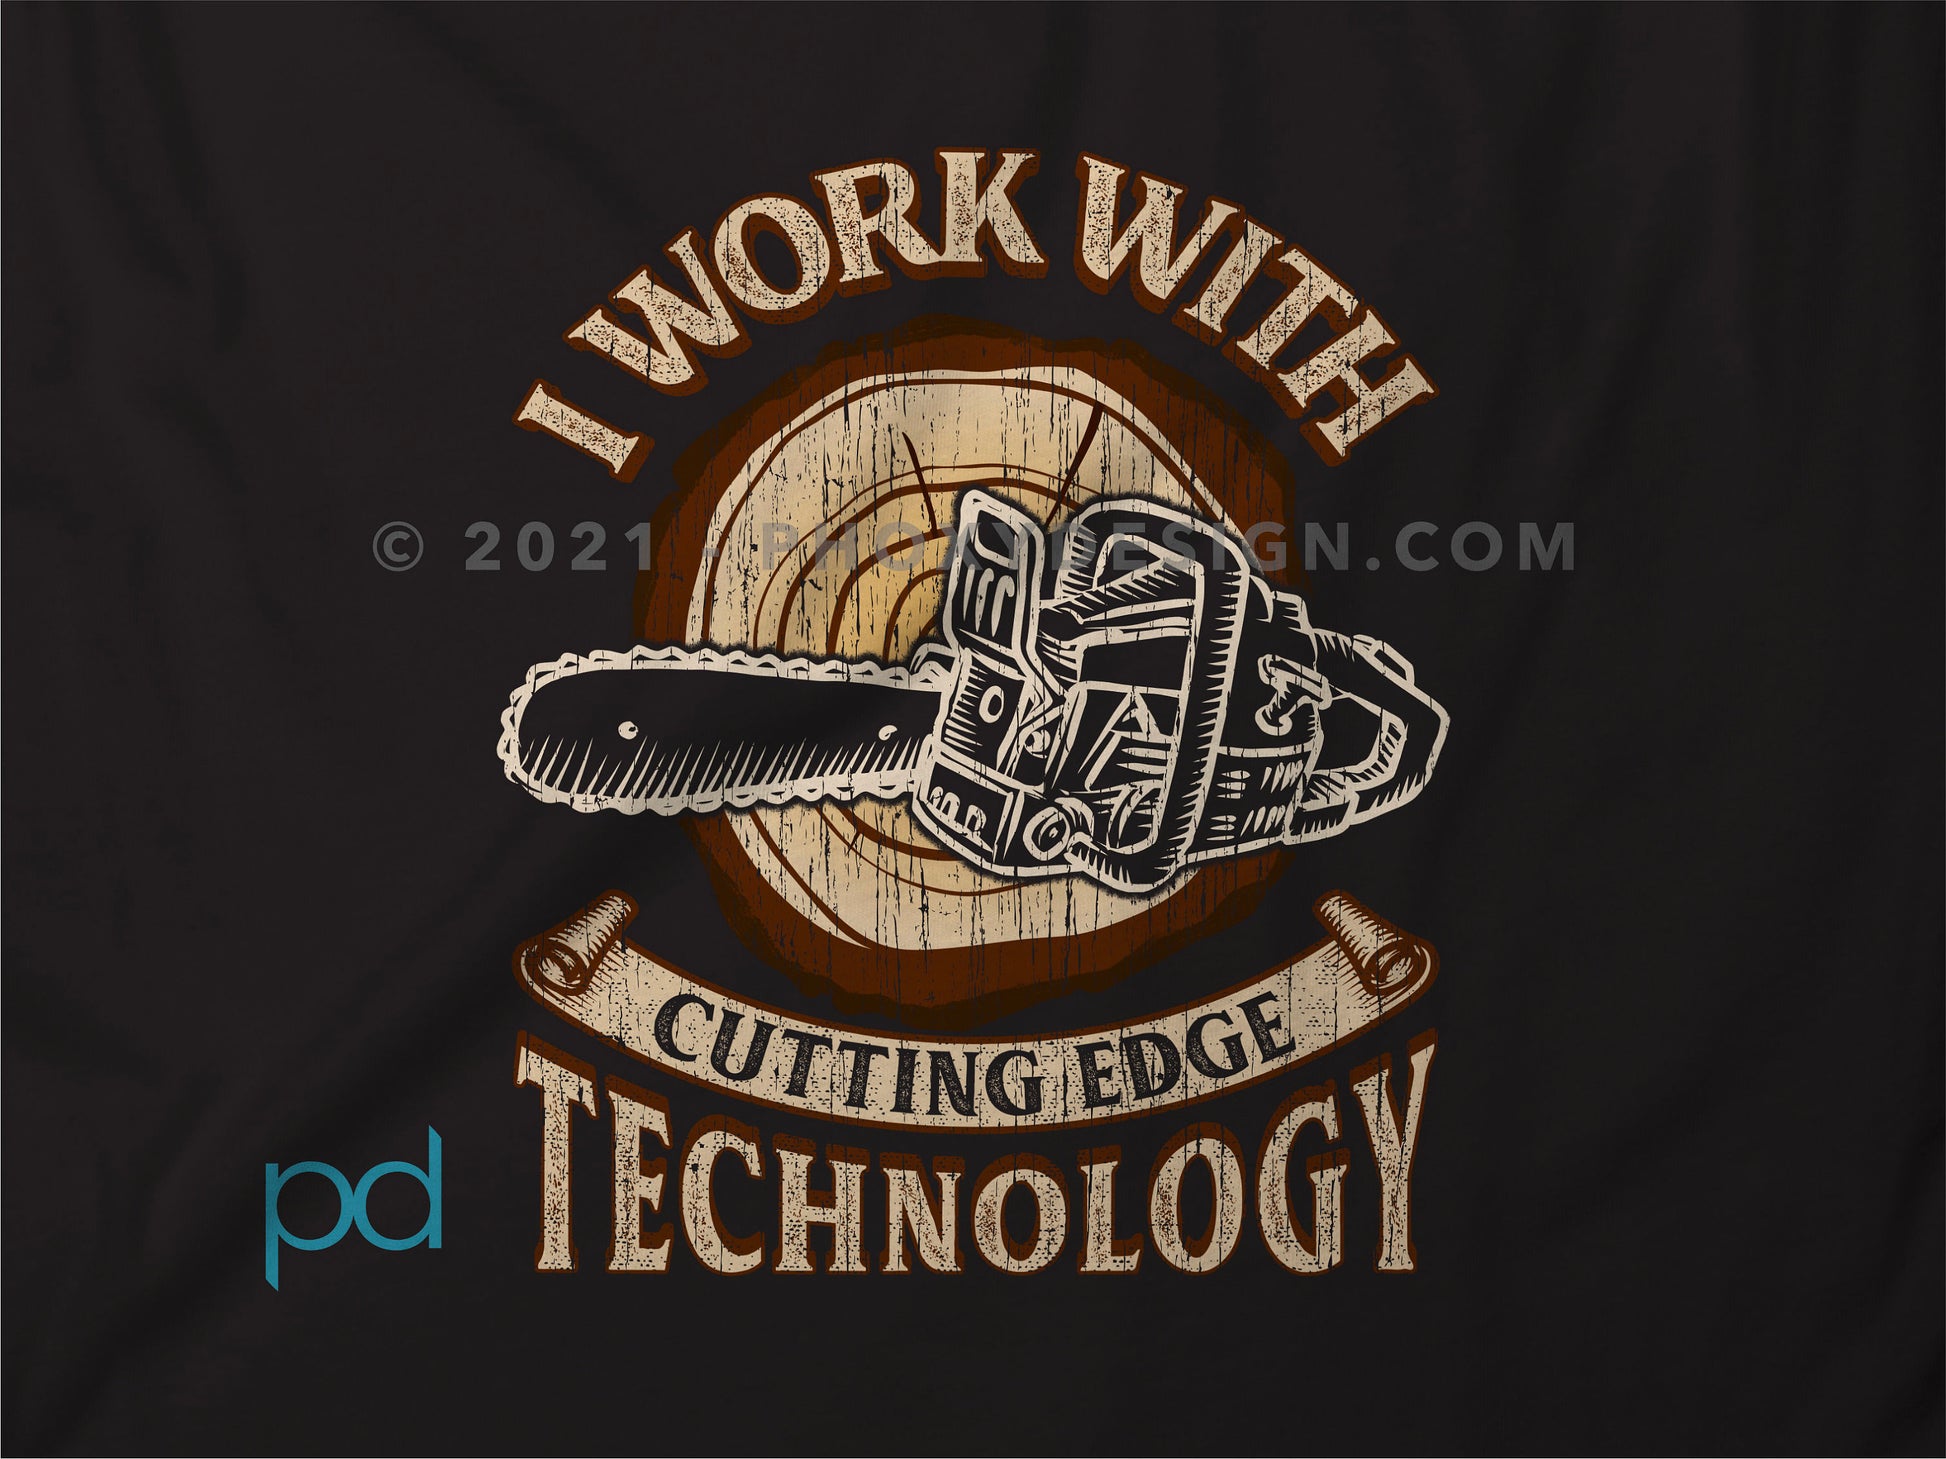 Funny Lumberjack Woodwork Long Sleeve T-Shirt, I Work With Cutting Edge Technology Pun Gift Idea, Humorous Arborist Chainsaw Longsleeved Top